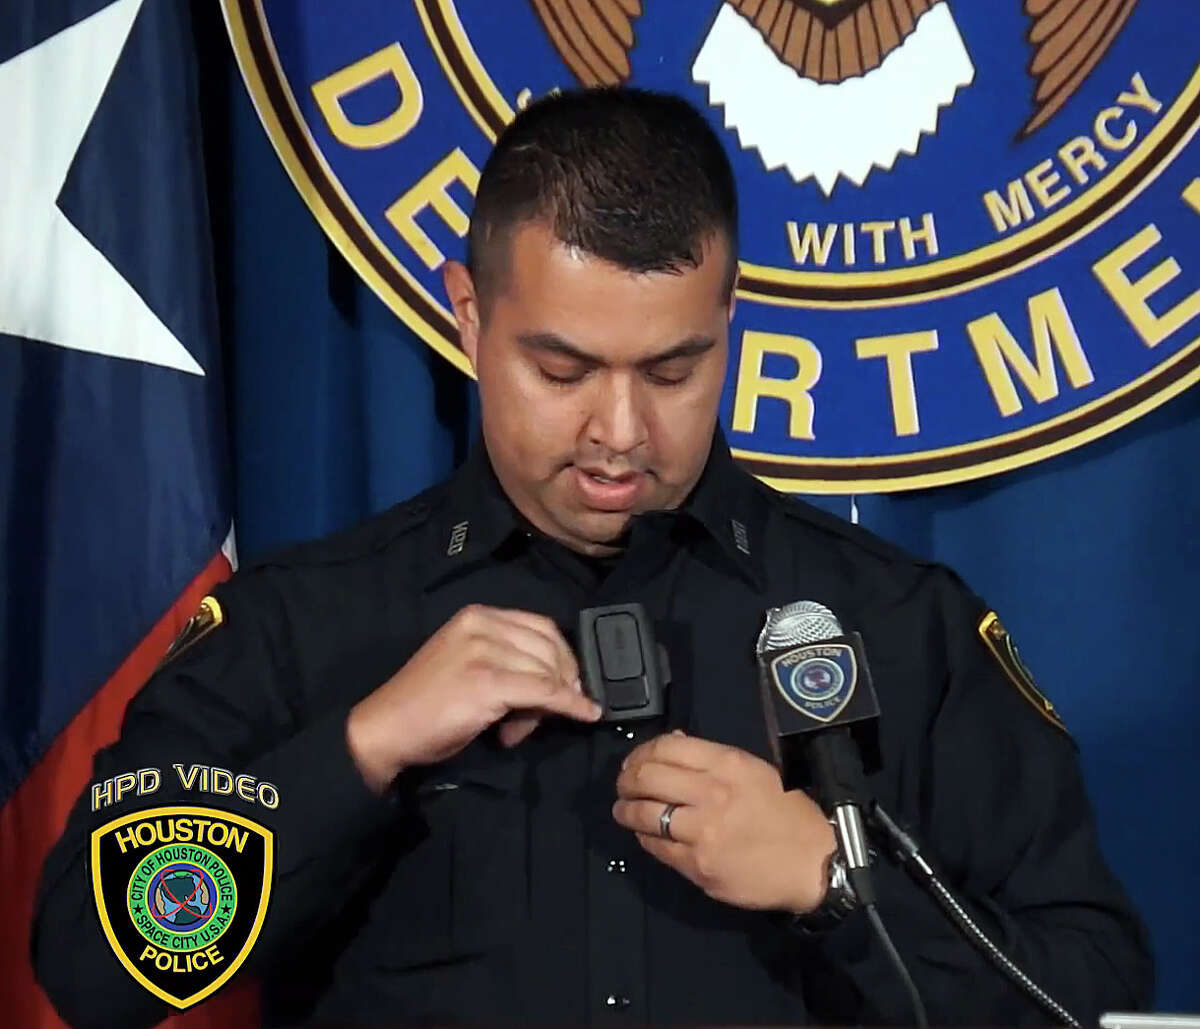 Jose Zapata of the North Patrol Division demonstrates a body camera - about the size of a pager - manufactured by Vievu.